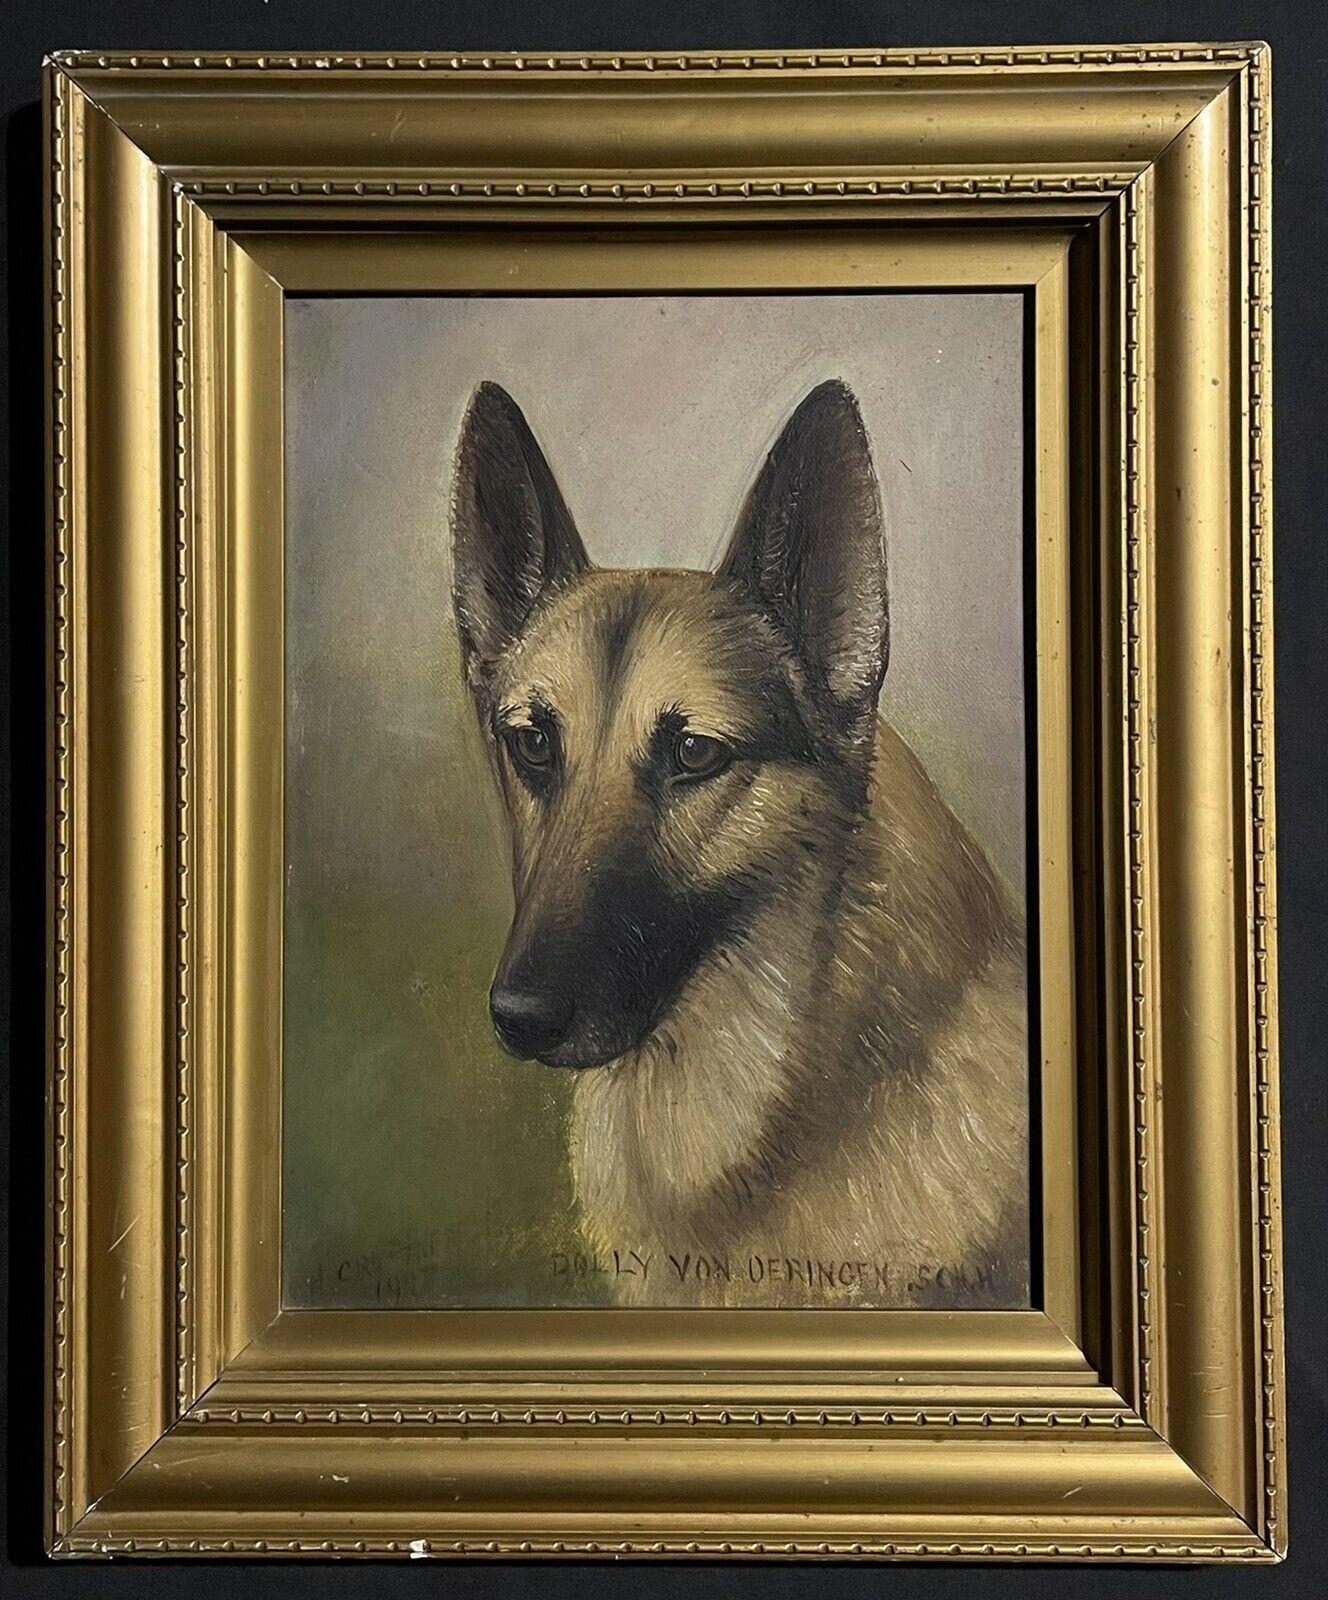 Antique English Dog Painting - Portrait of a German Shepherd Dog, Signed Dated